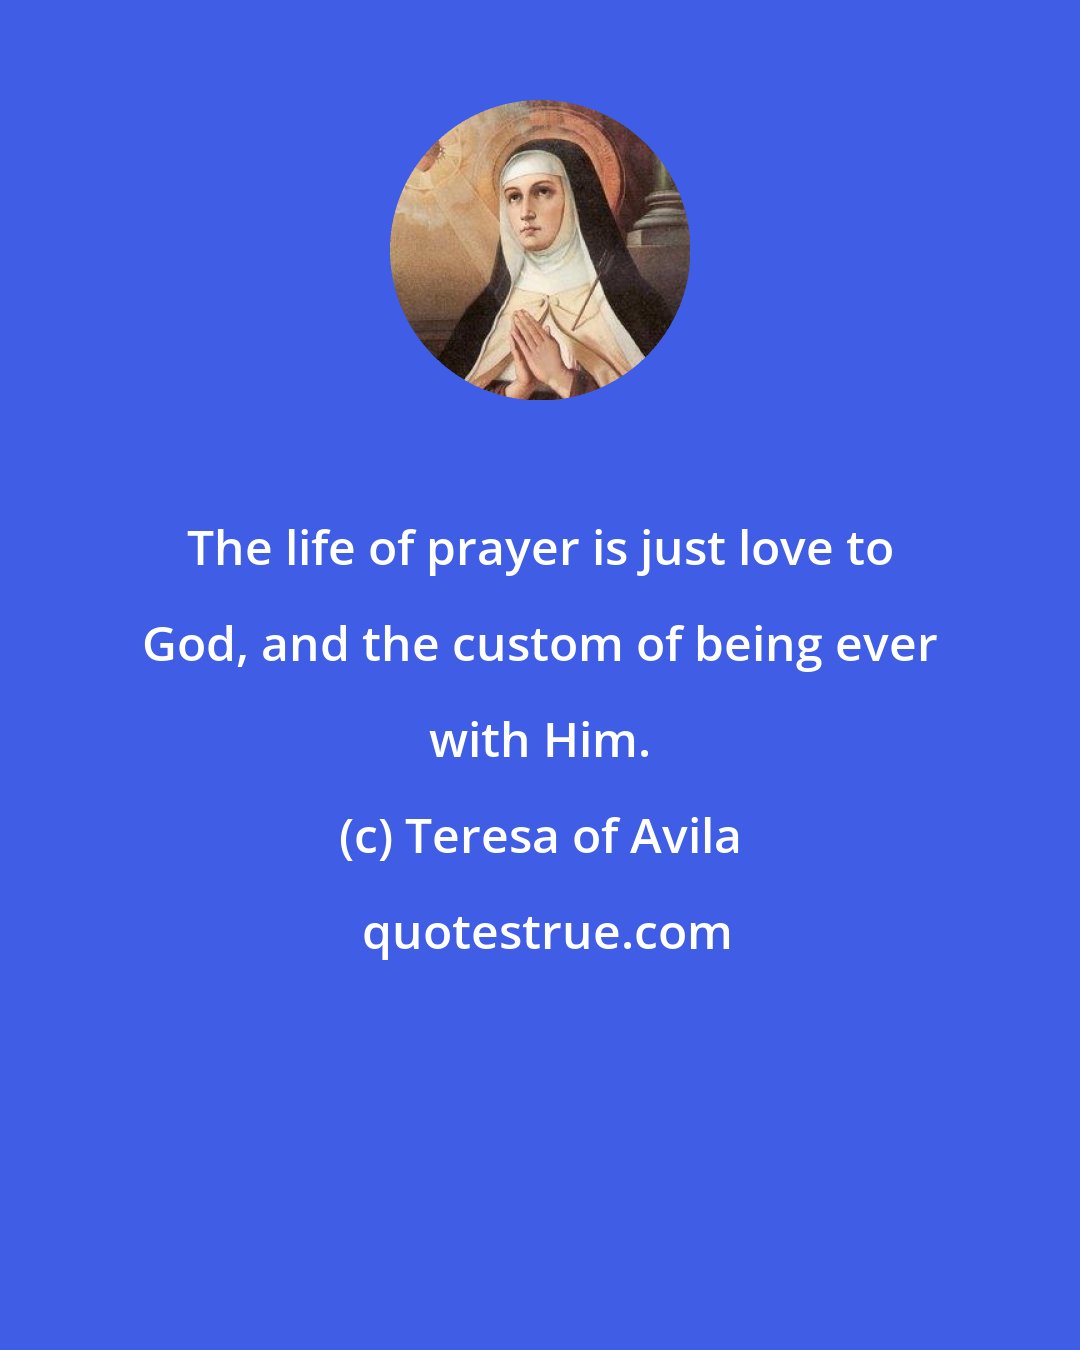 Teresa of Avila: The life of prayer is just love to God, and the custom of being ever with Him.